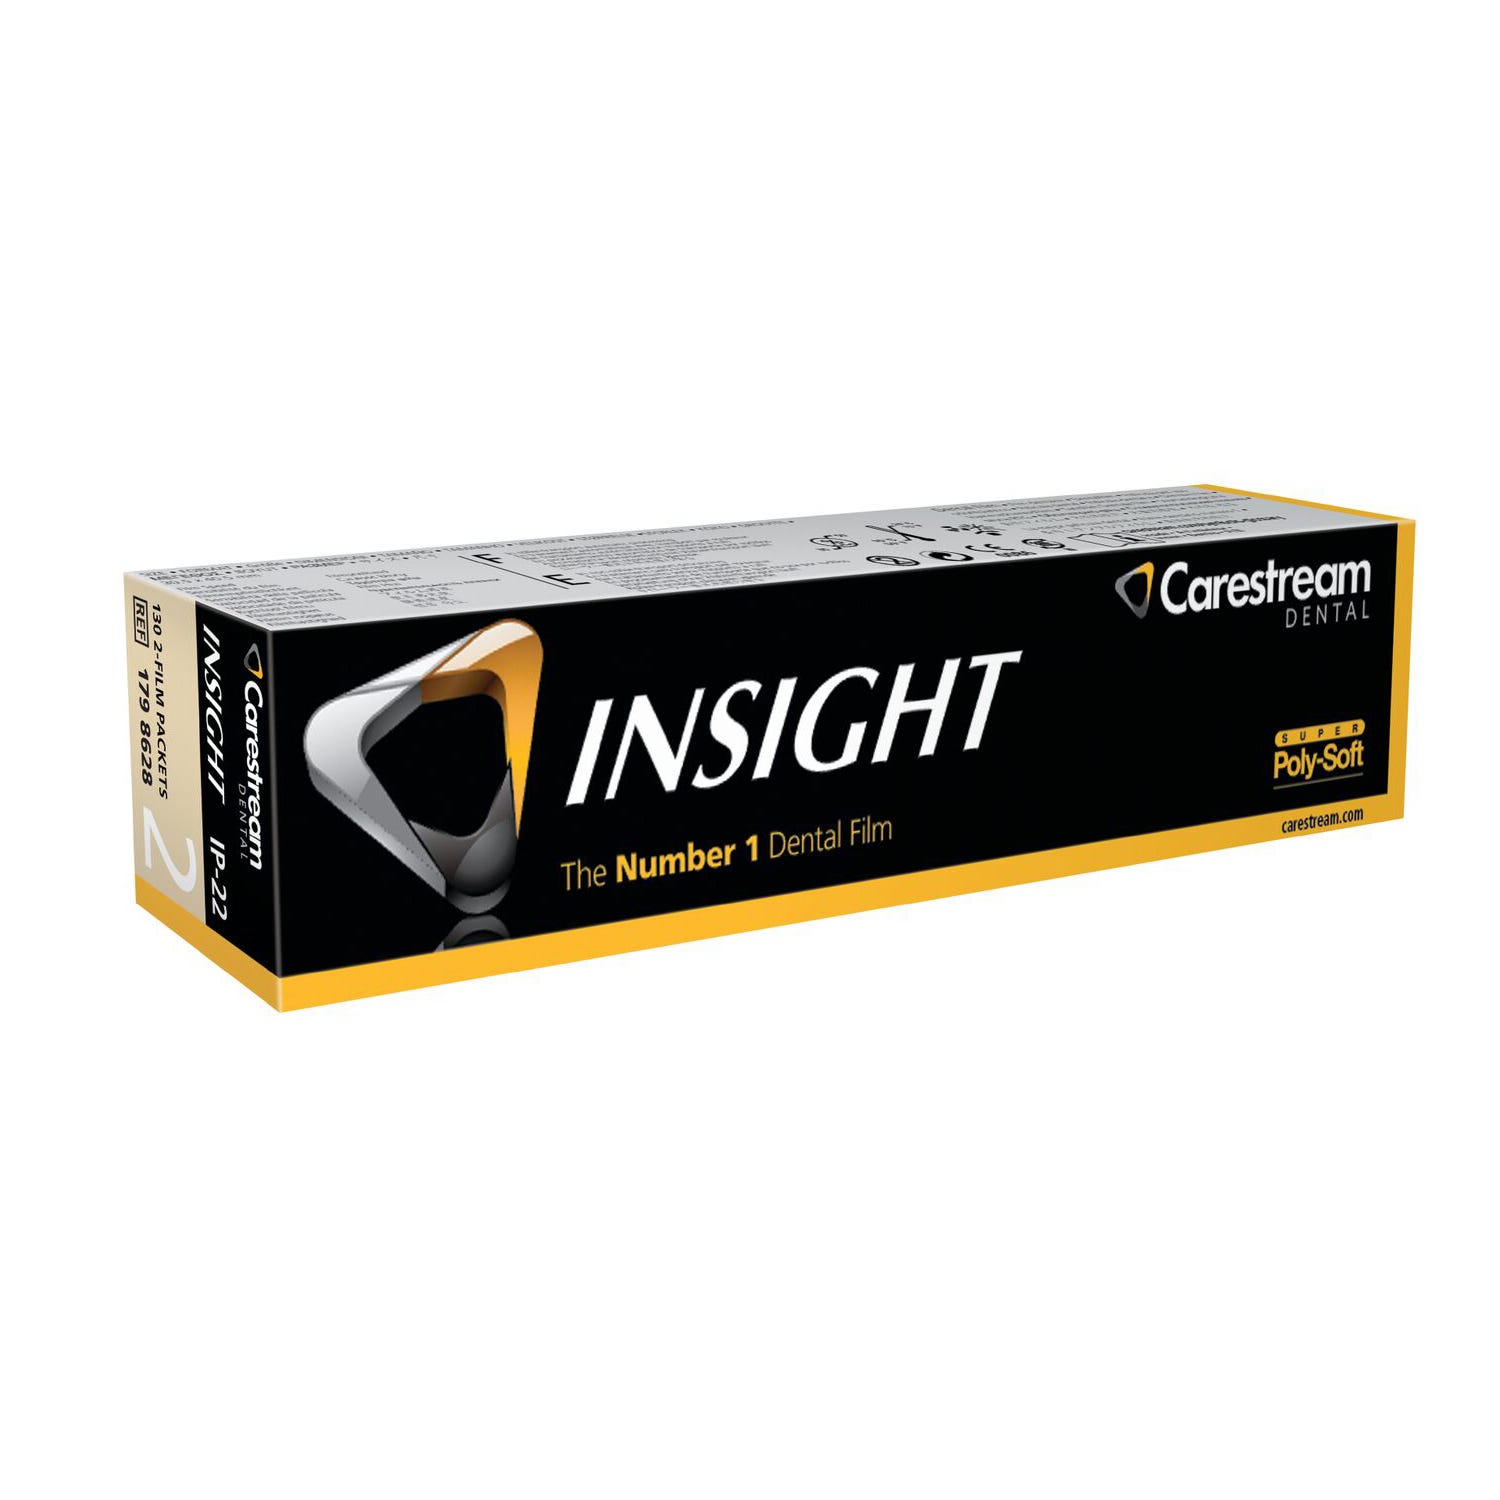 INSIGHT Dental Film, Size 2, IP-22, Super Poly-Soft Packets (Double Film) - 130/Box